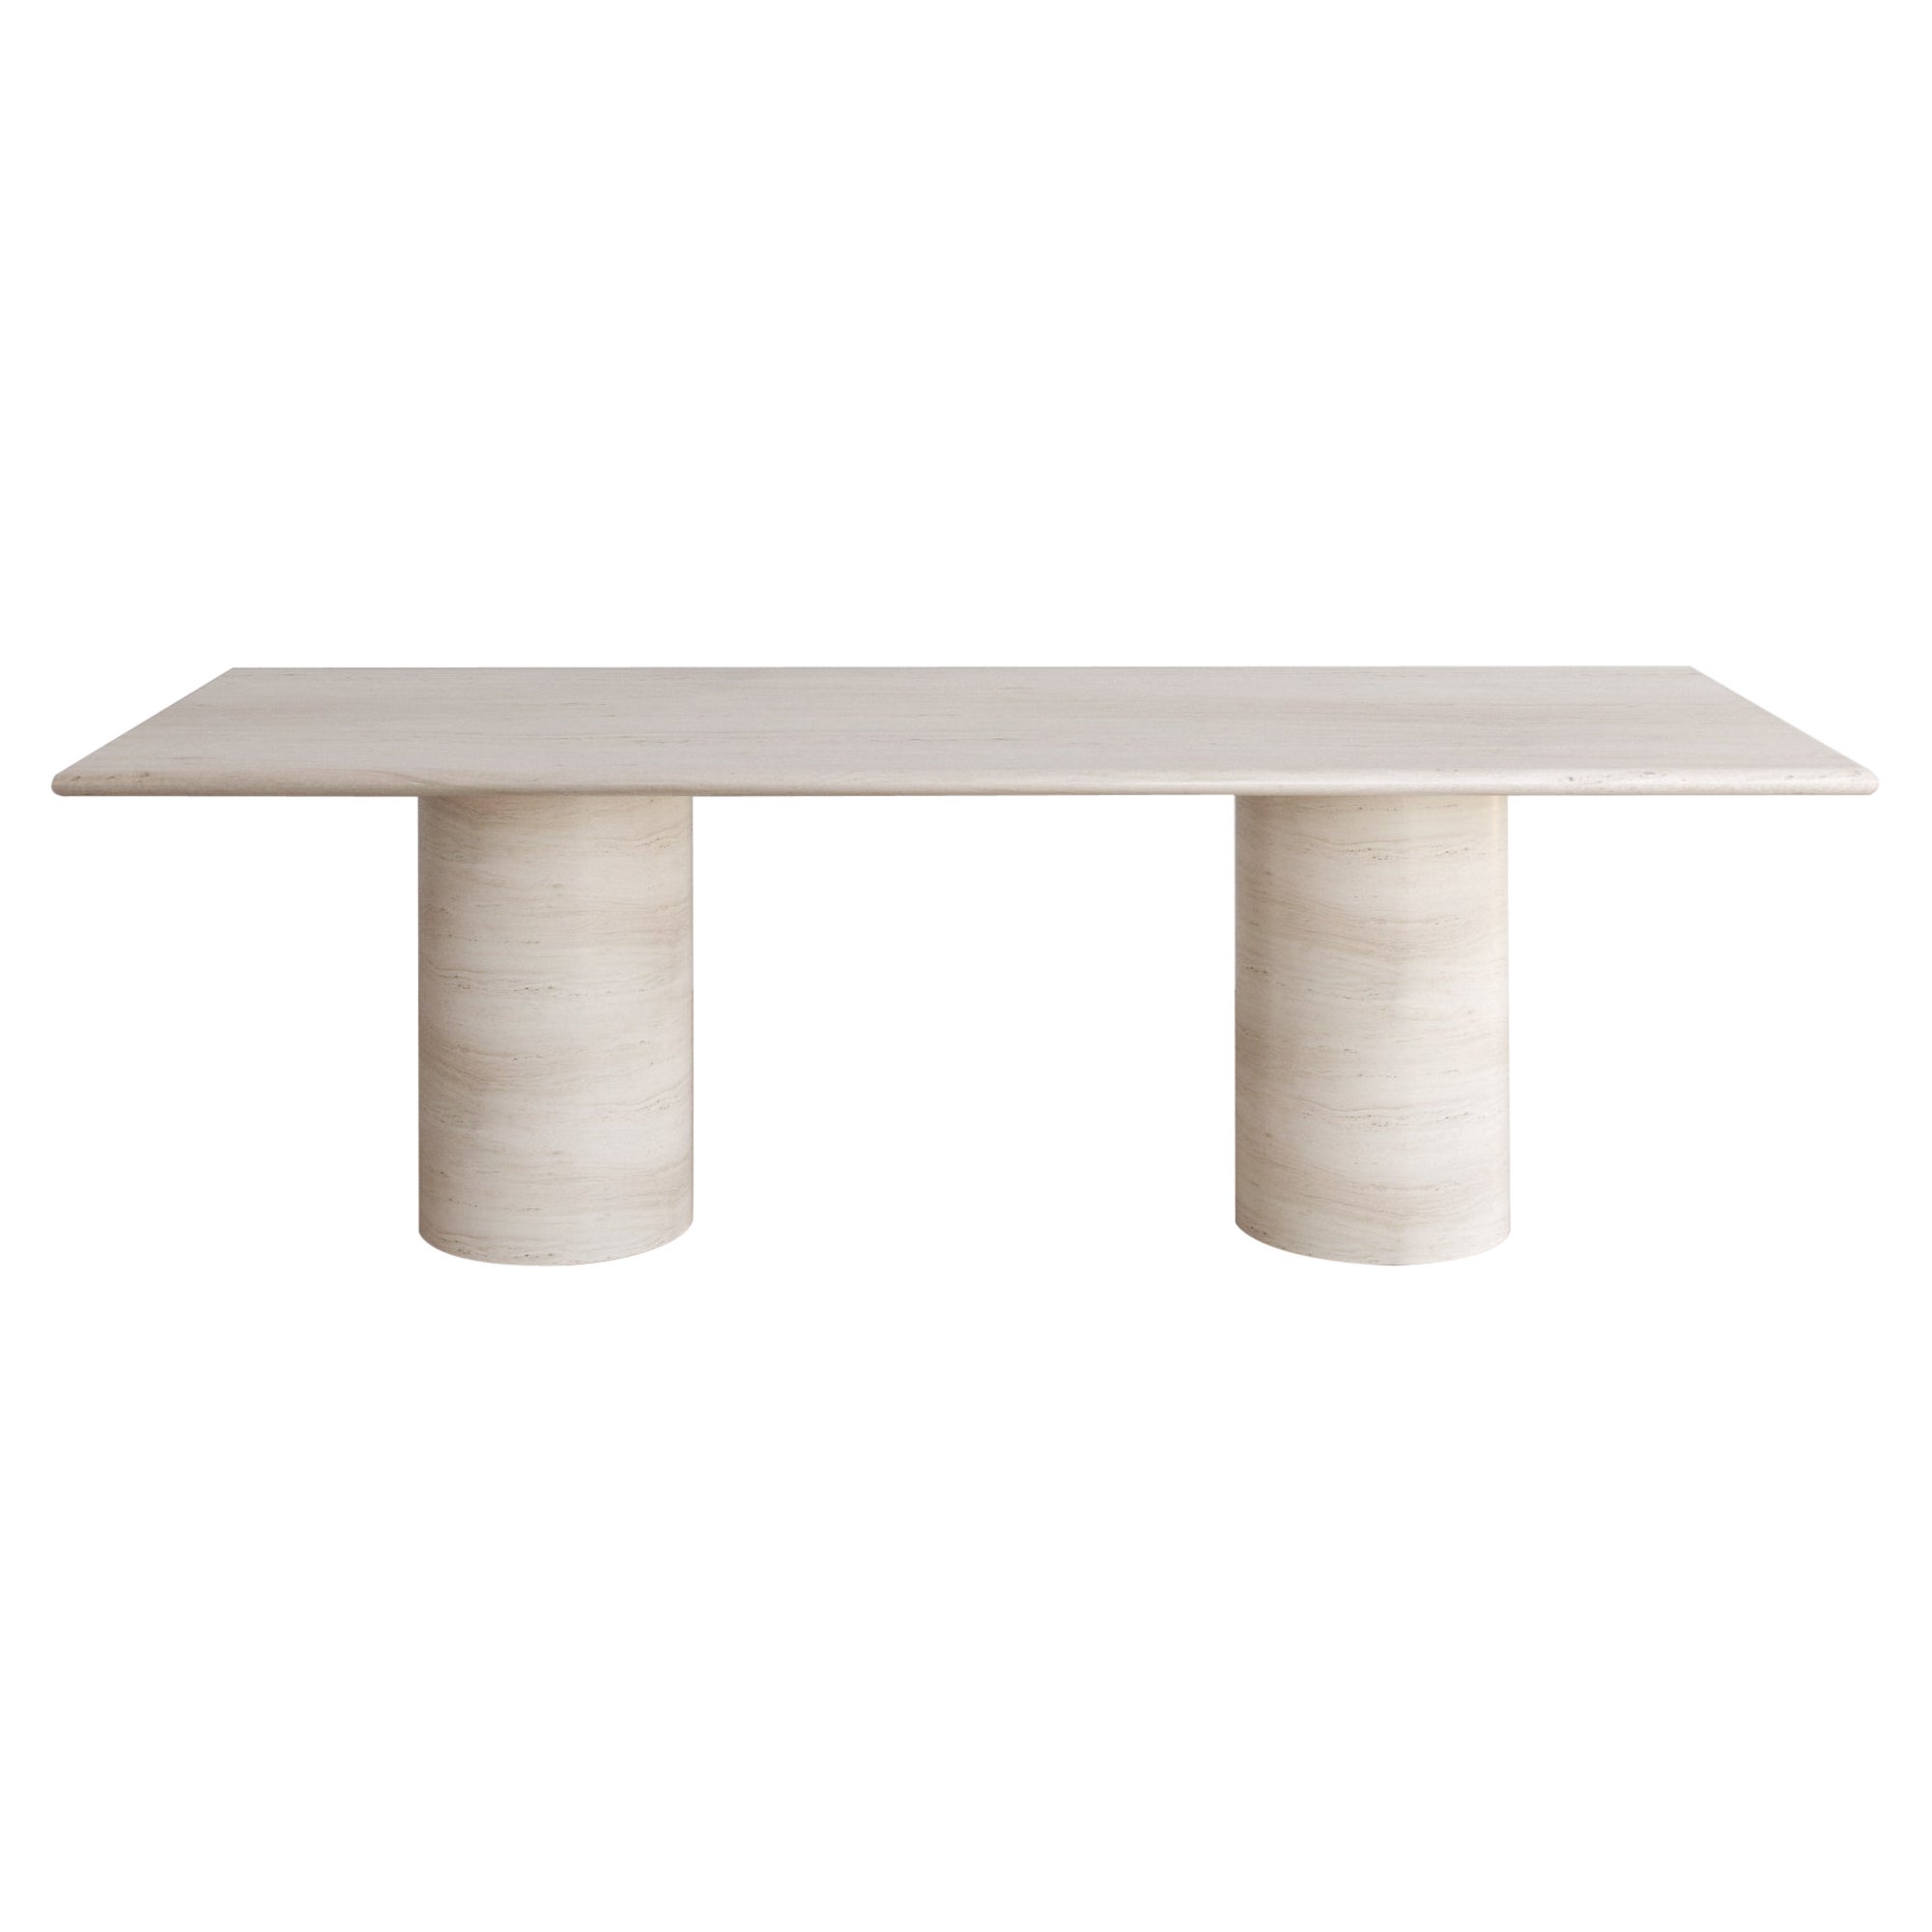 Bianco Travertine Voyage Dining Table II by The Essentialist For Sale